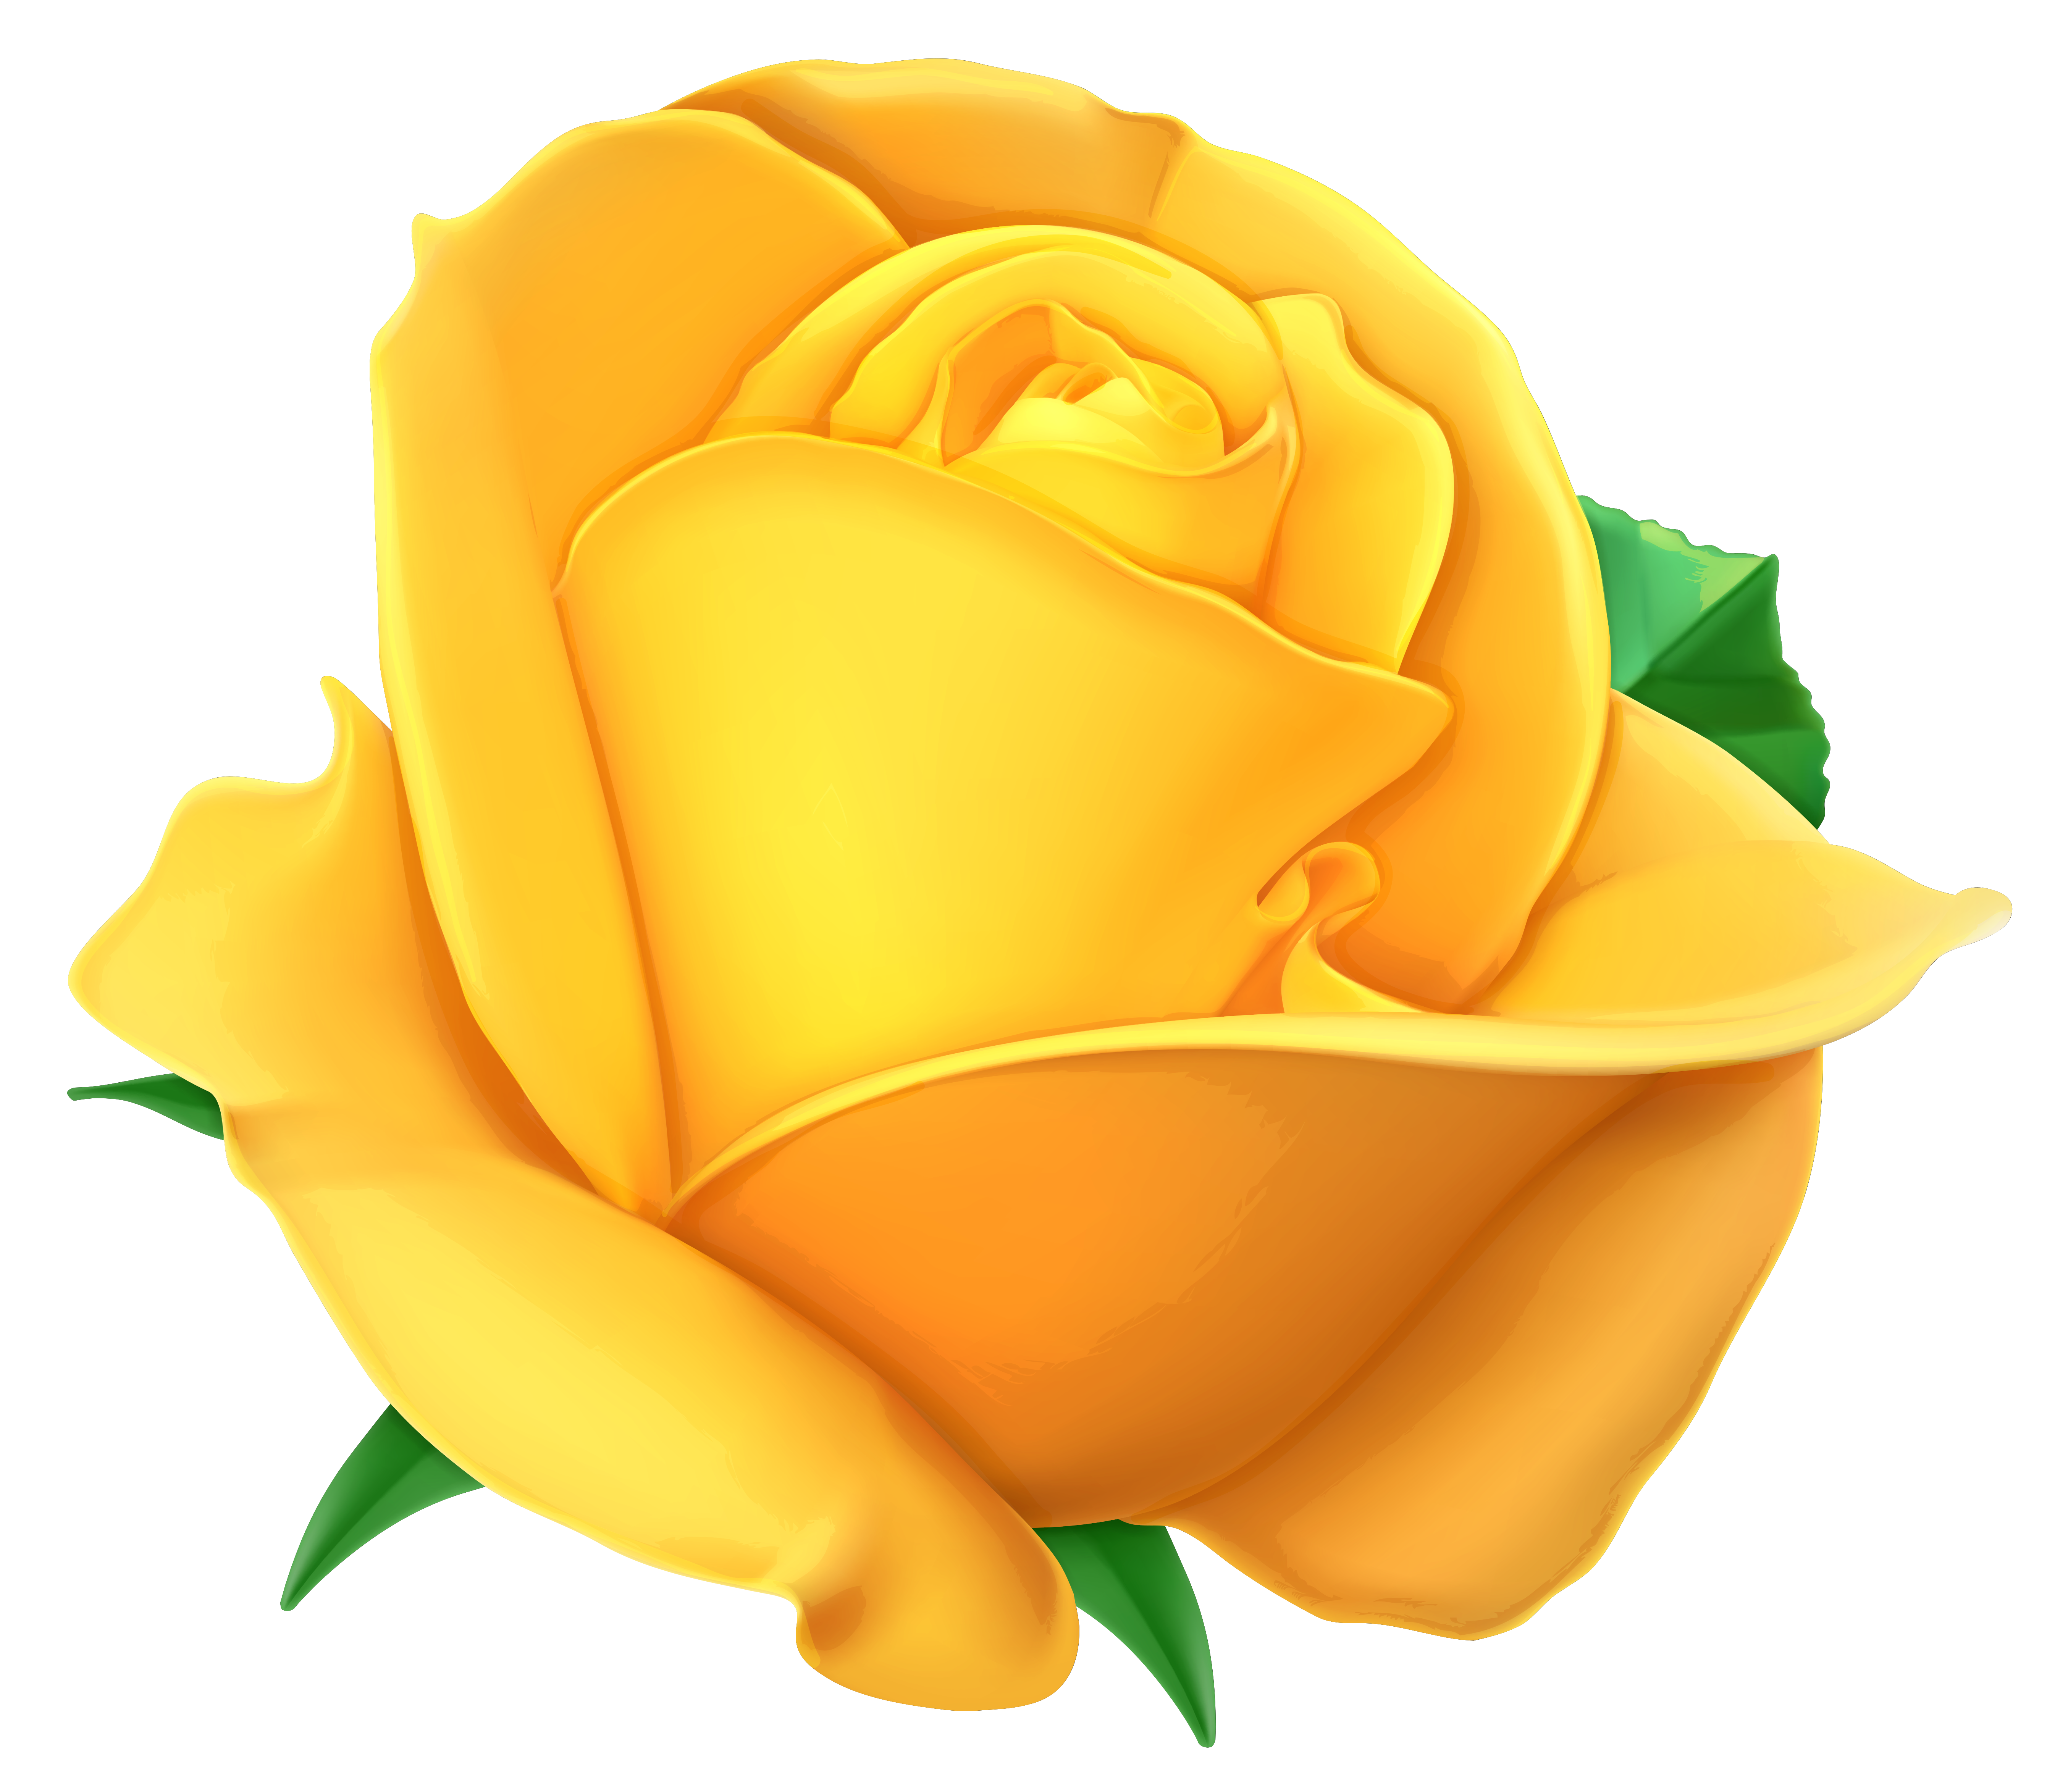 Yellow Rose clipart #3, Download drawings